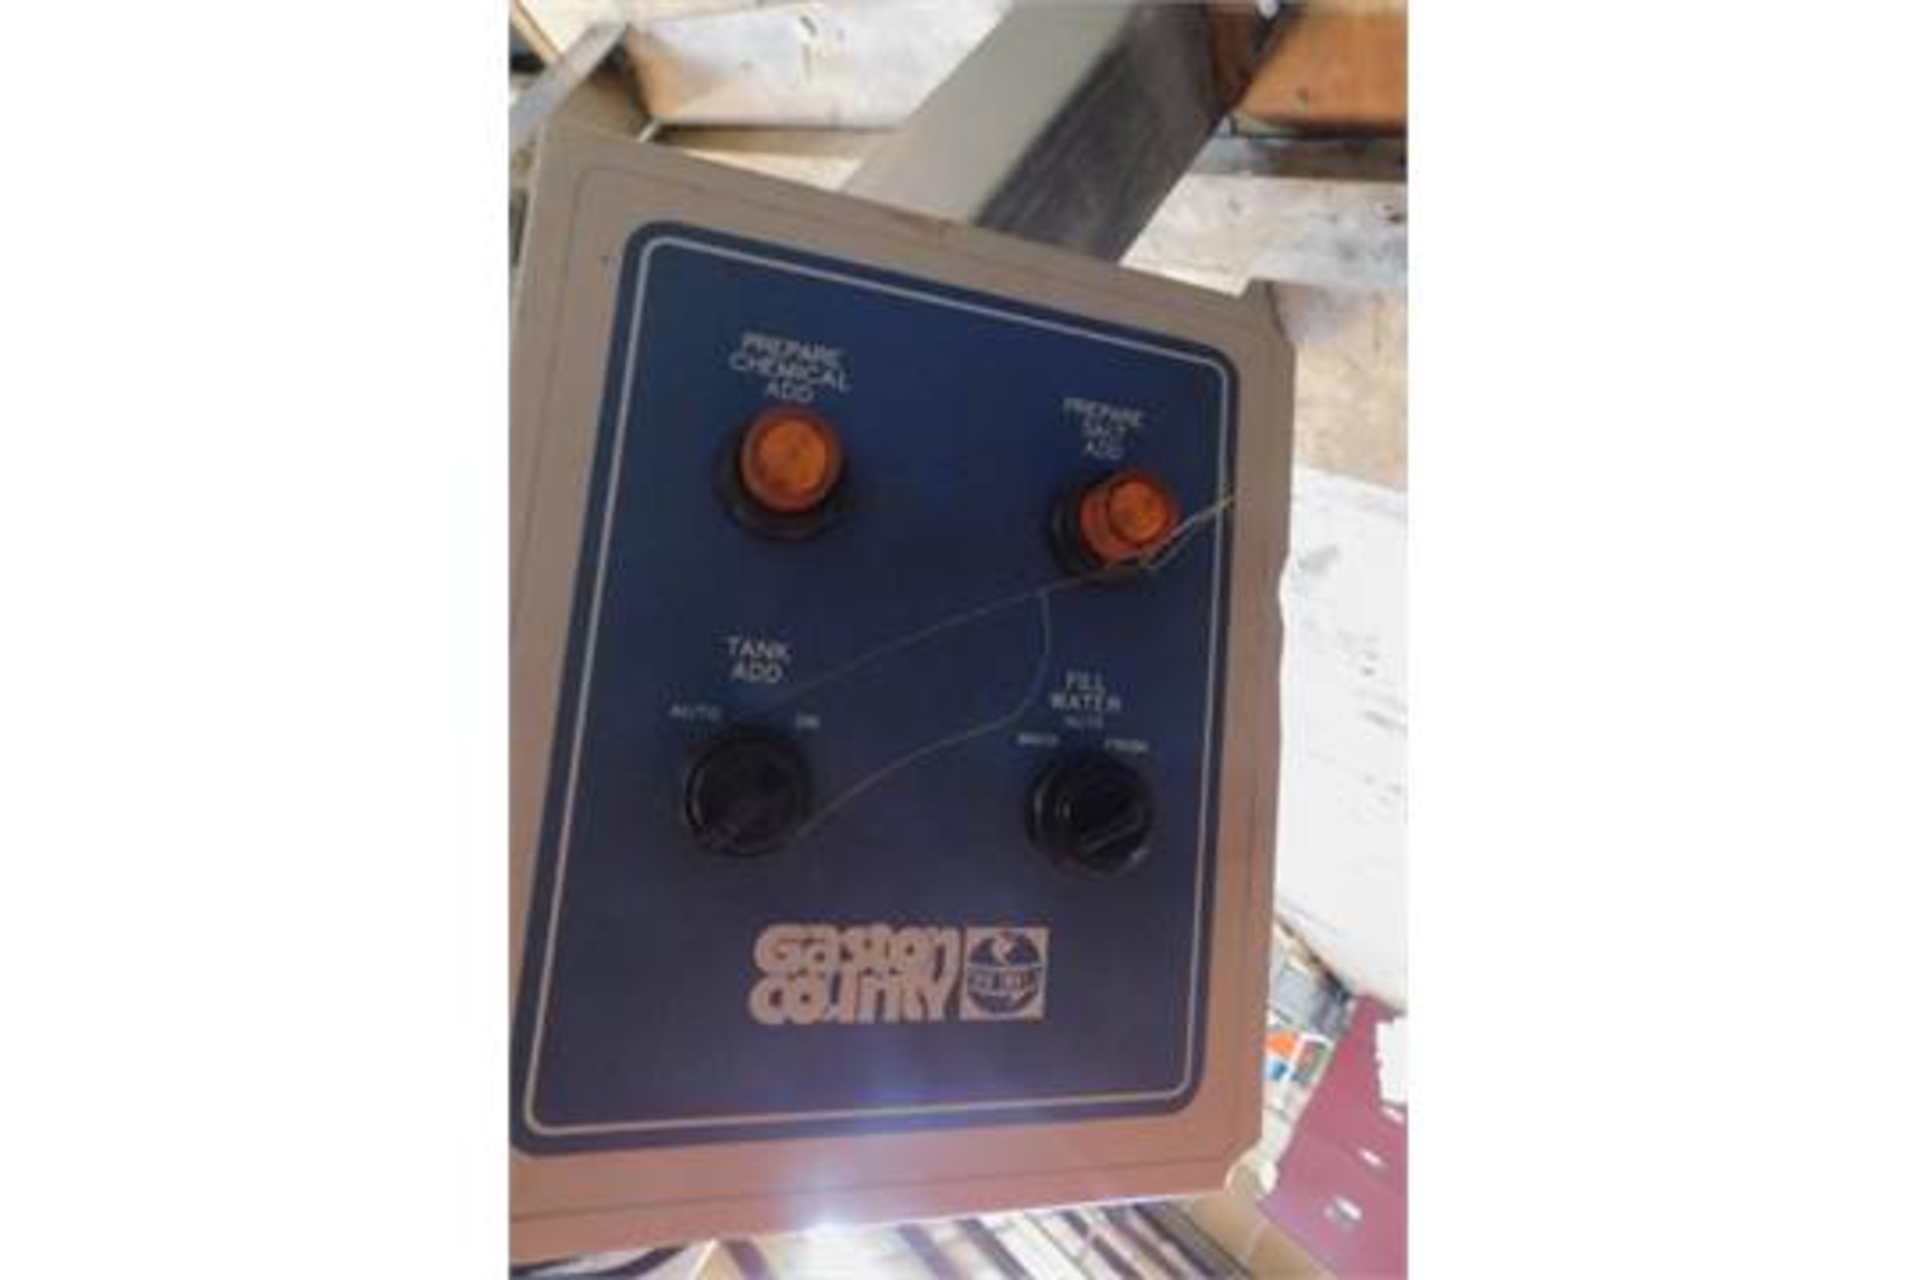 Gaston County Dye Jet Control Panels - Qty. Two, Rigging Fee: $25 - Image 5 of 5